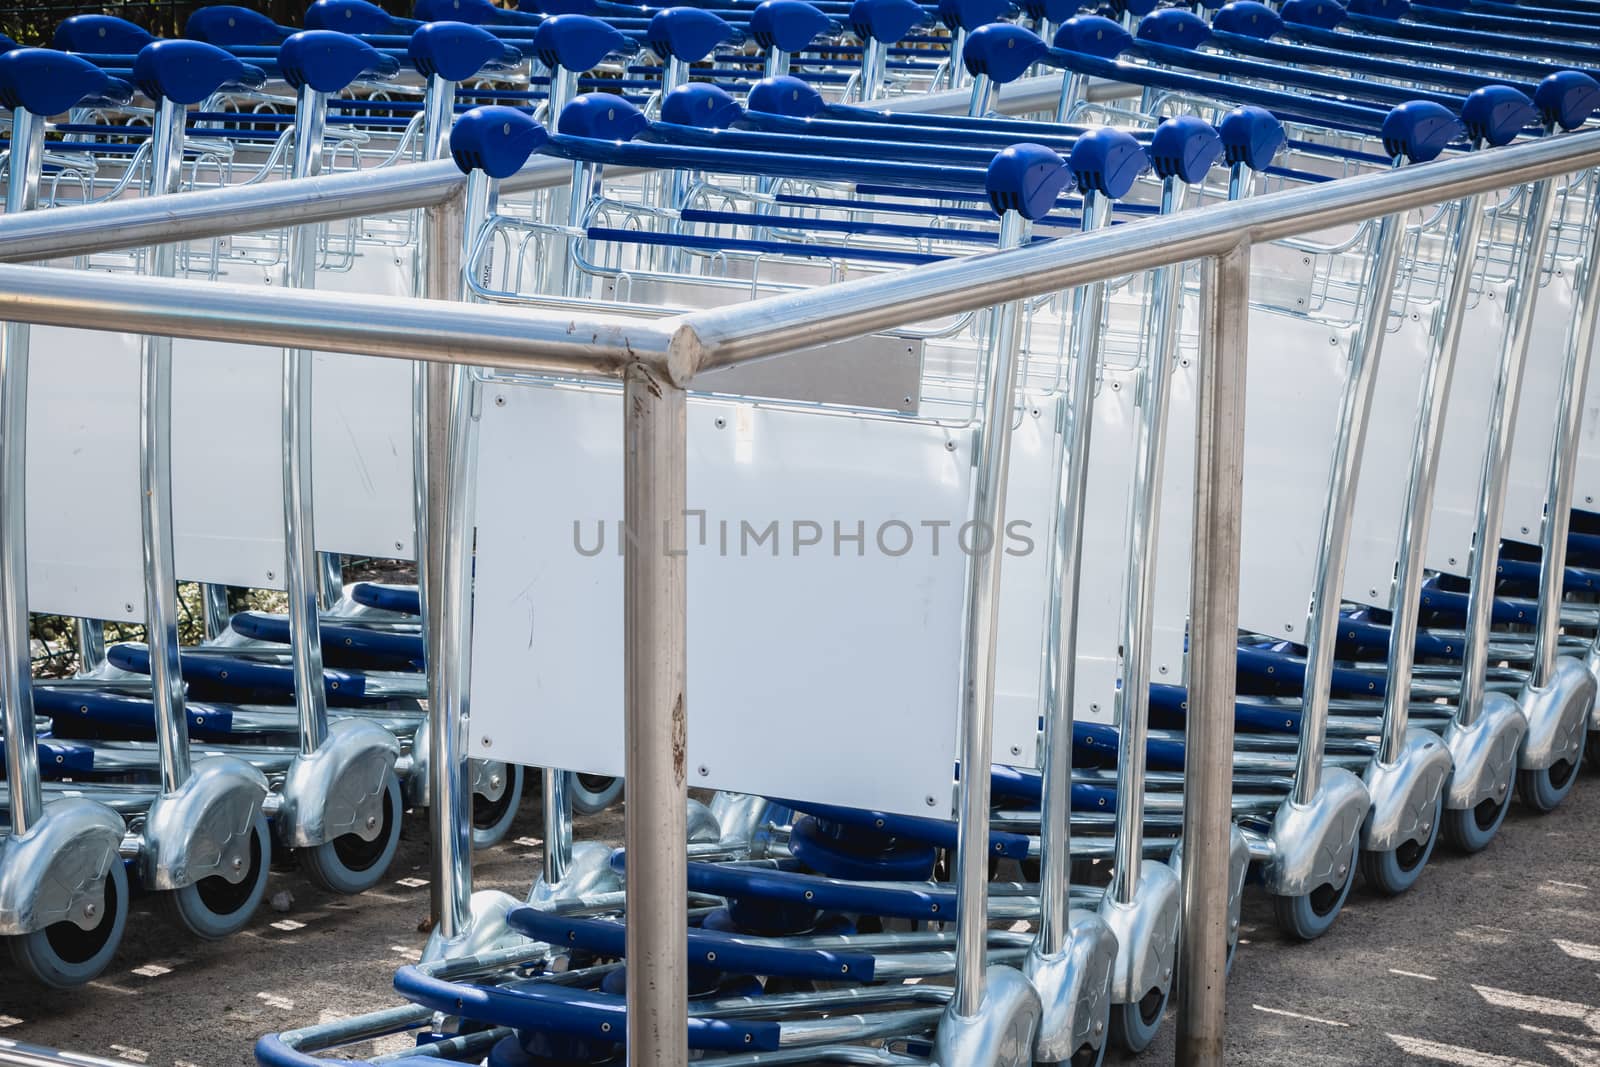 carry cart outside an airport available to travelers to move their luggage